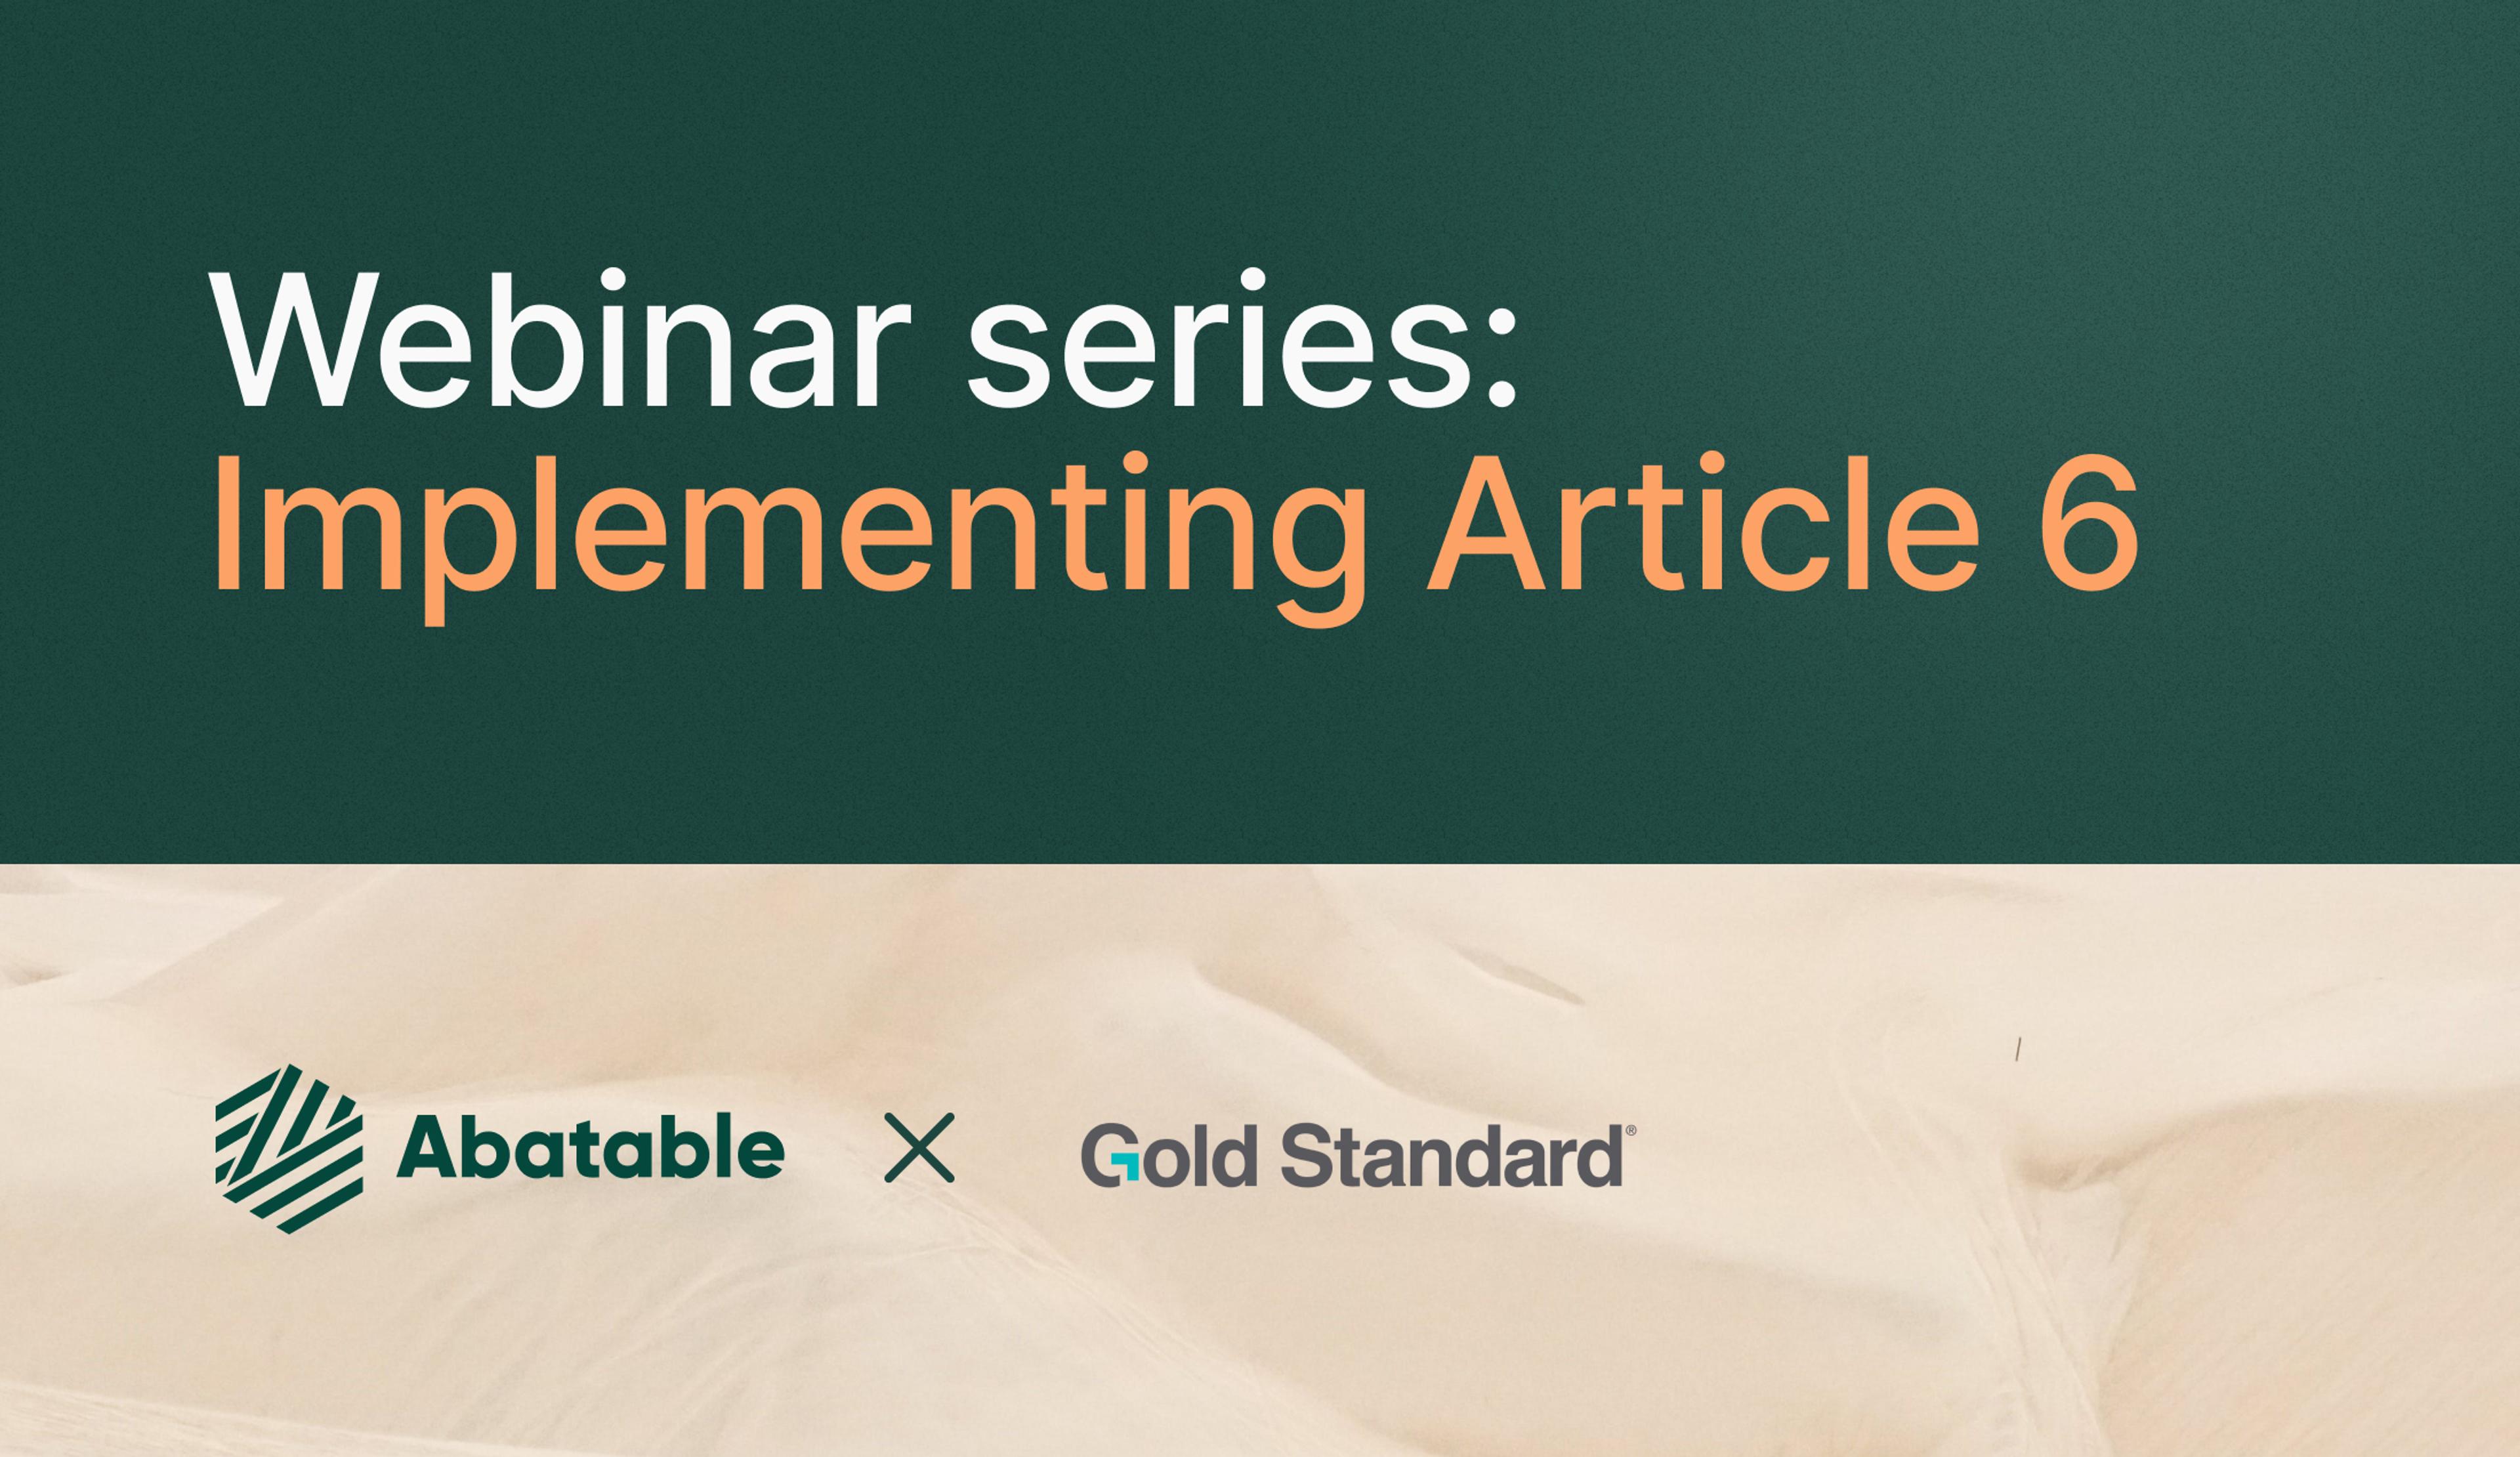 Webinar series: Implementing Article 6 by Abatable and Gold Standard